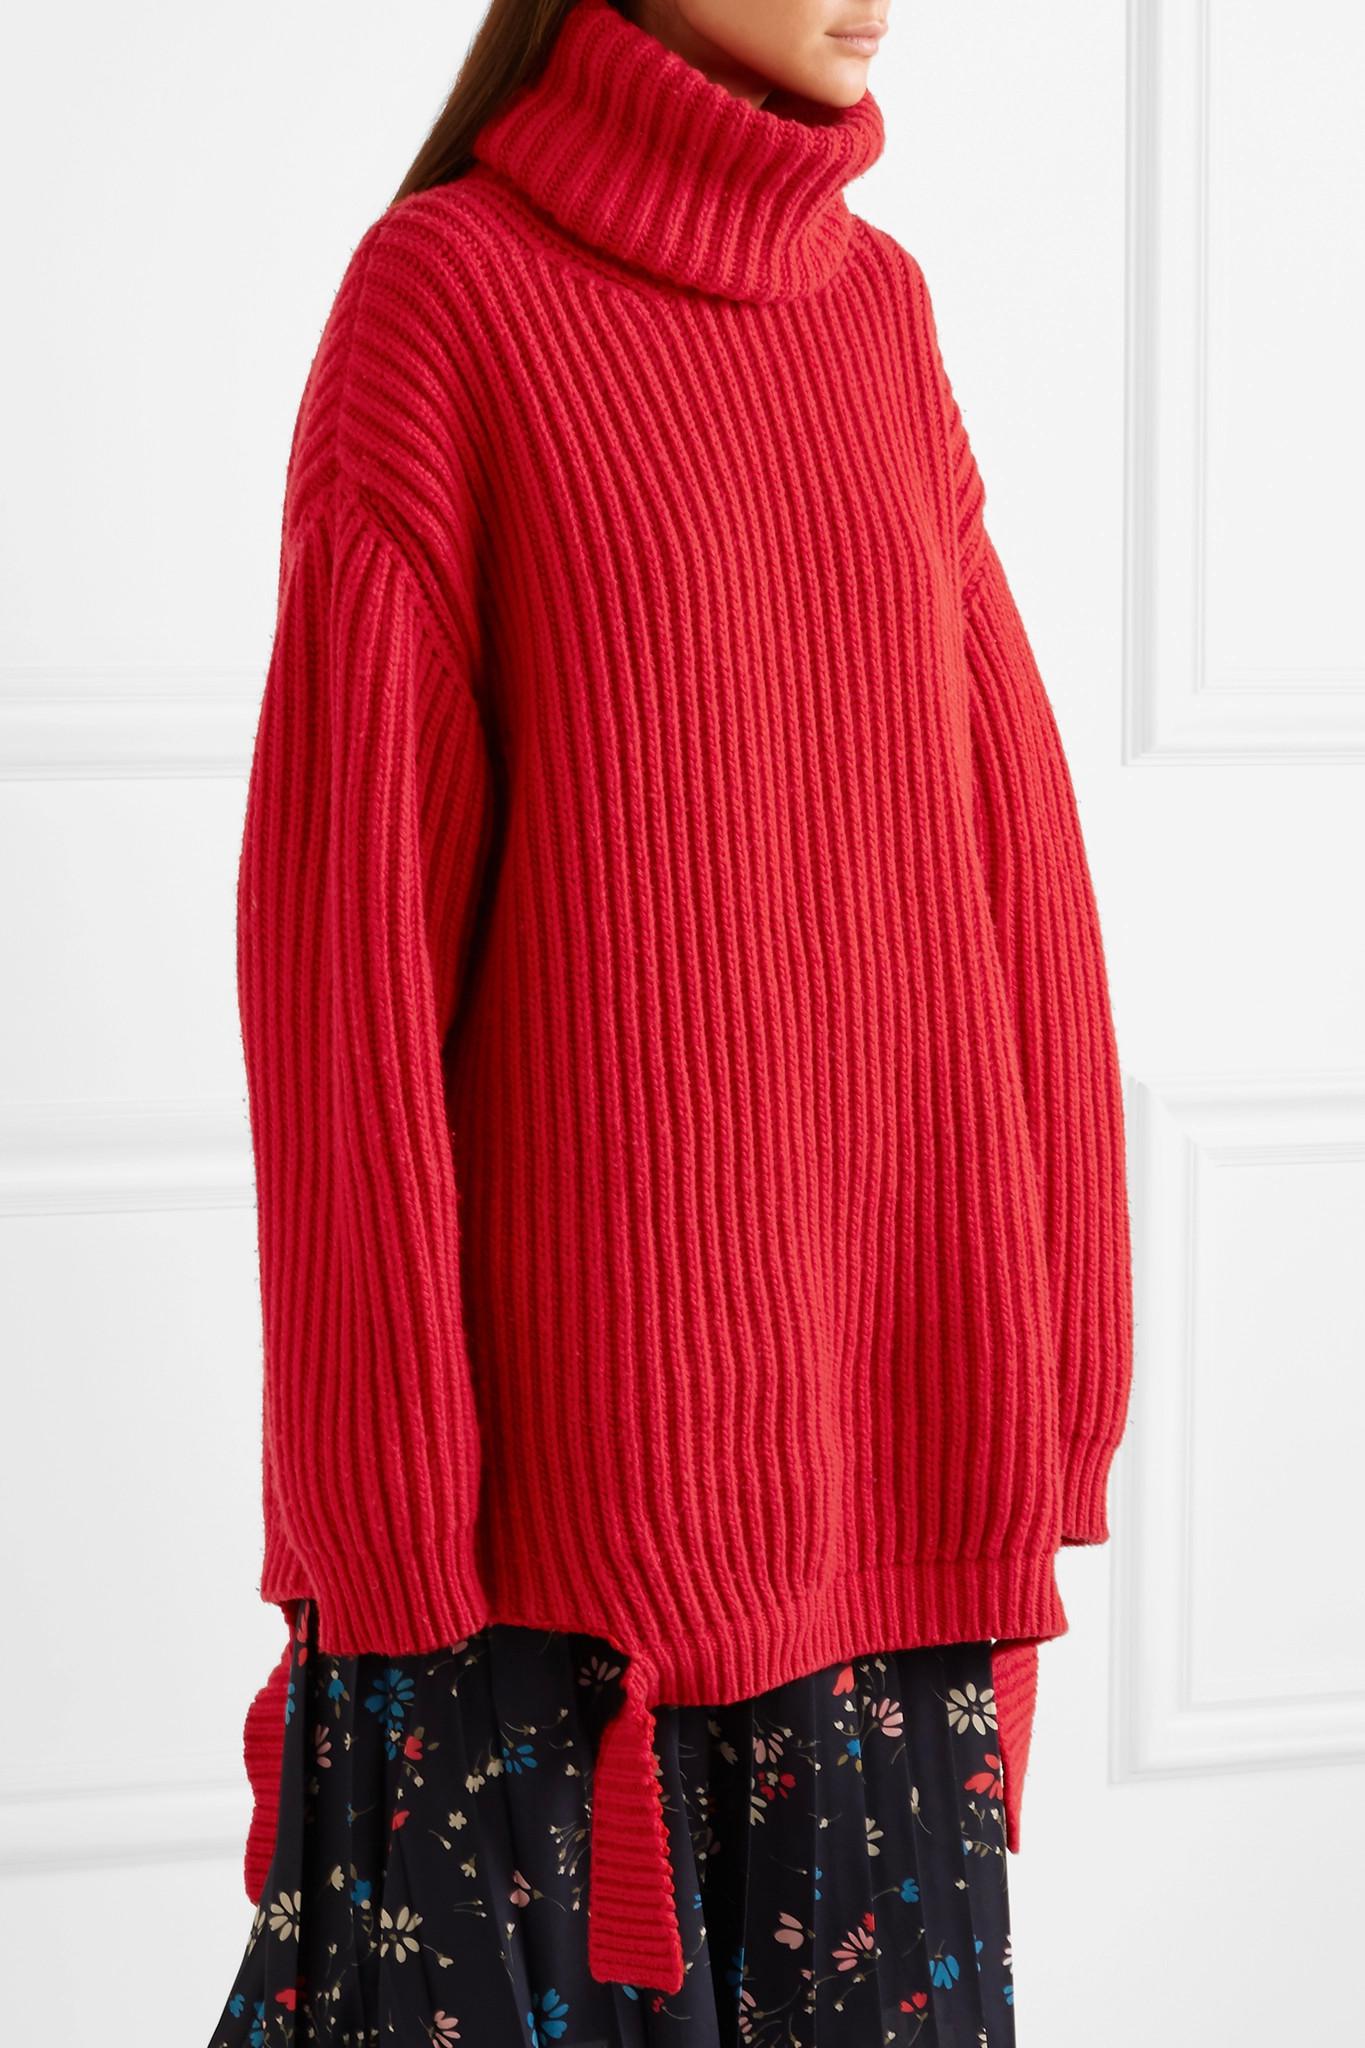 Balenciaga Oversized Ribbed Wool Turtleneck Sweater in Red - Lyst